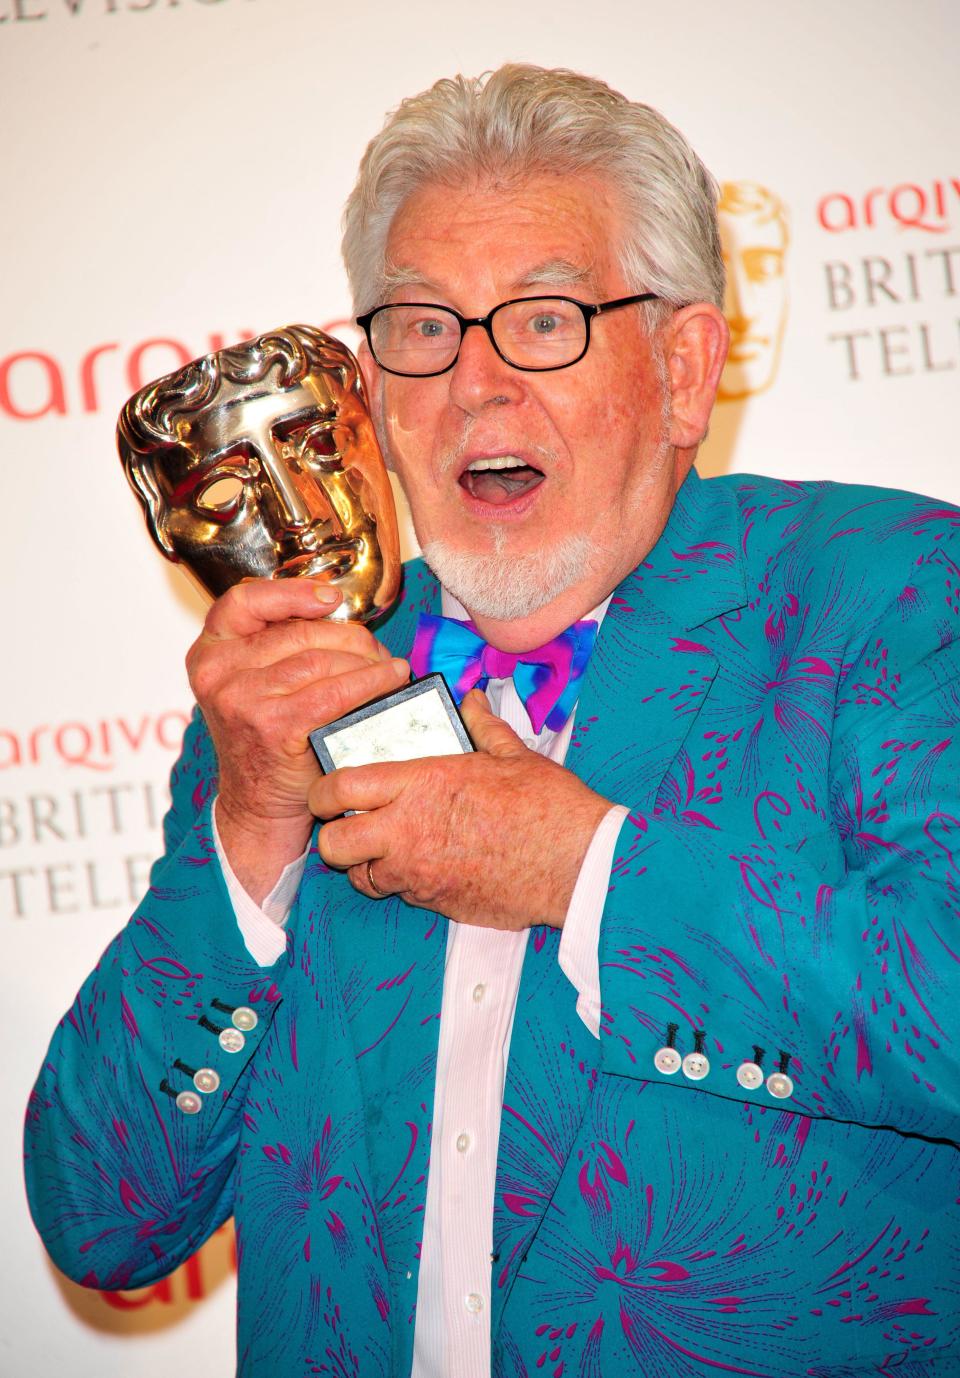 Winner of the Fellowship award Rolf Harris at the BAFTA TV Awards on Sunday, May 27, 2012, in London. (Photo by Jon Furniss/Invision/AP)